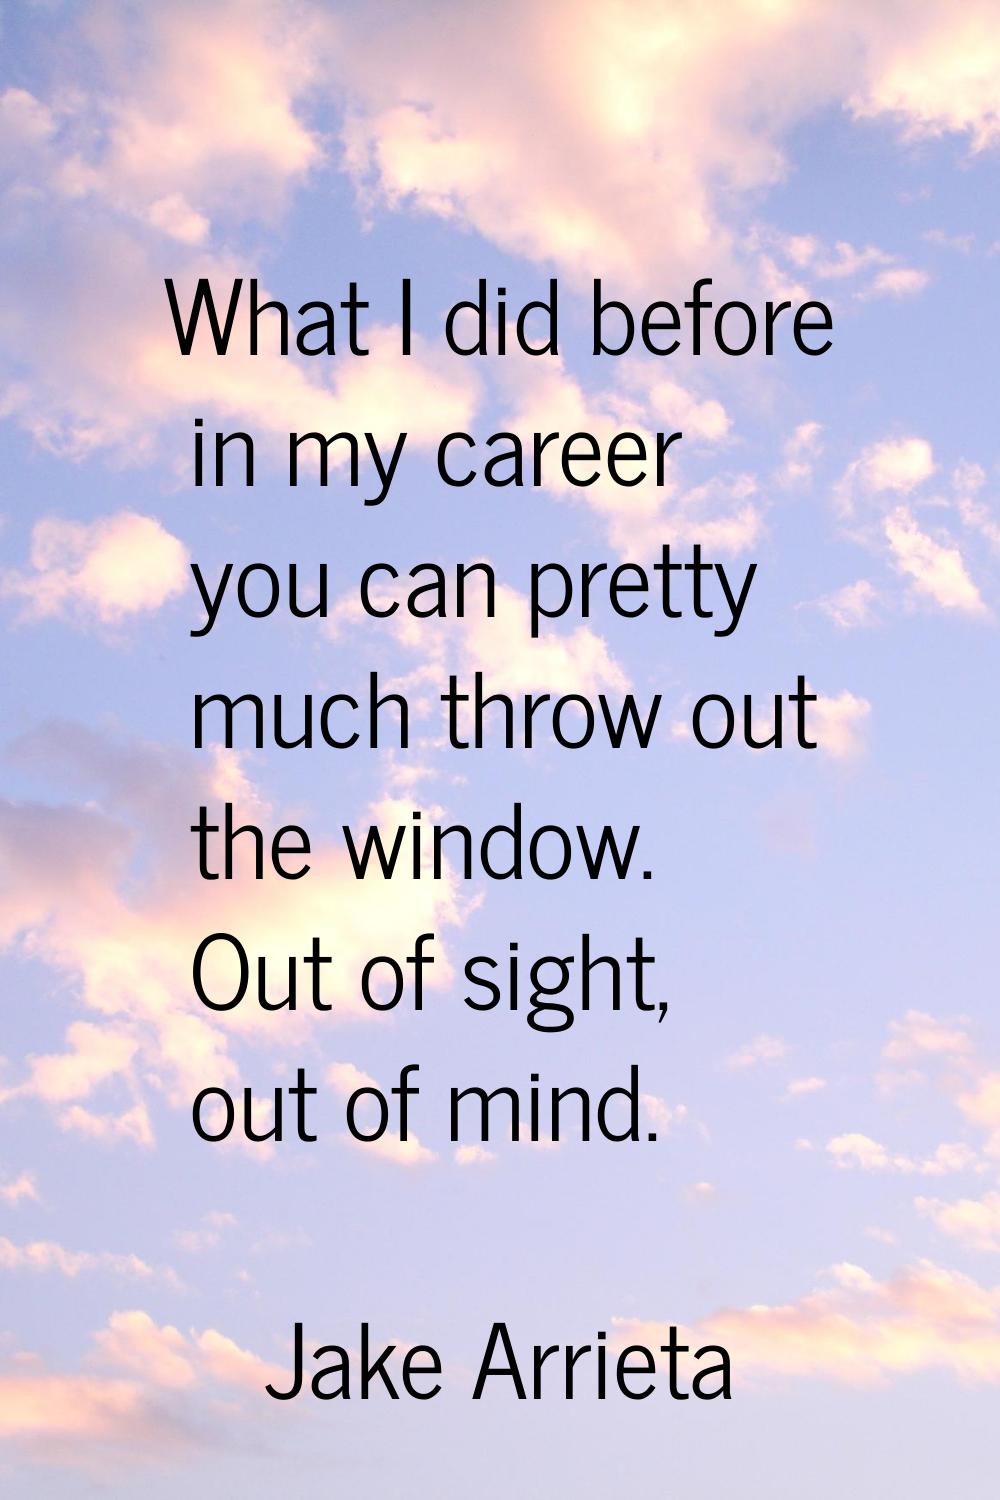 What I did before in my career you can pretty much throw out the window. Out of sight, out of mind.